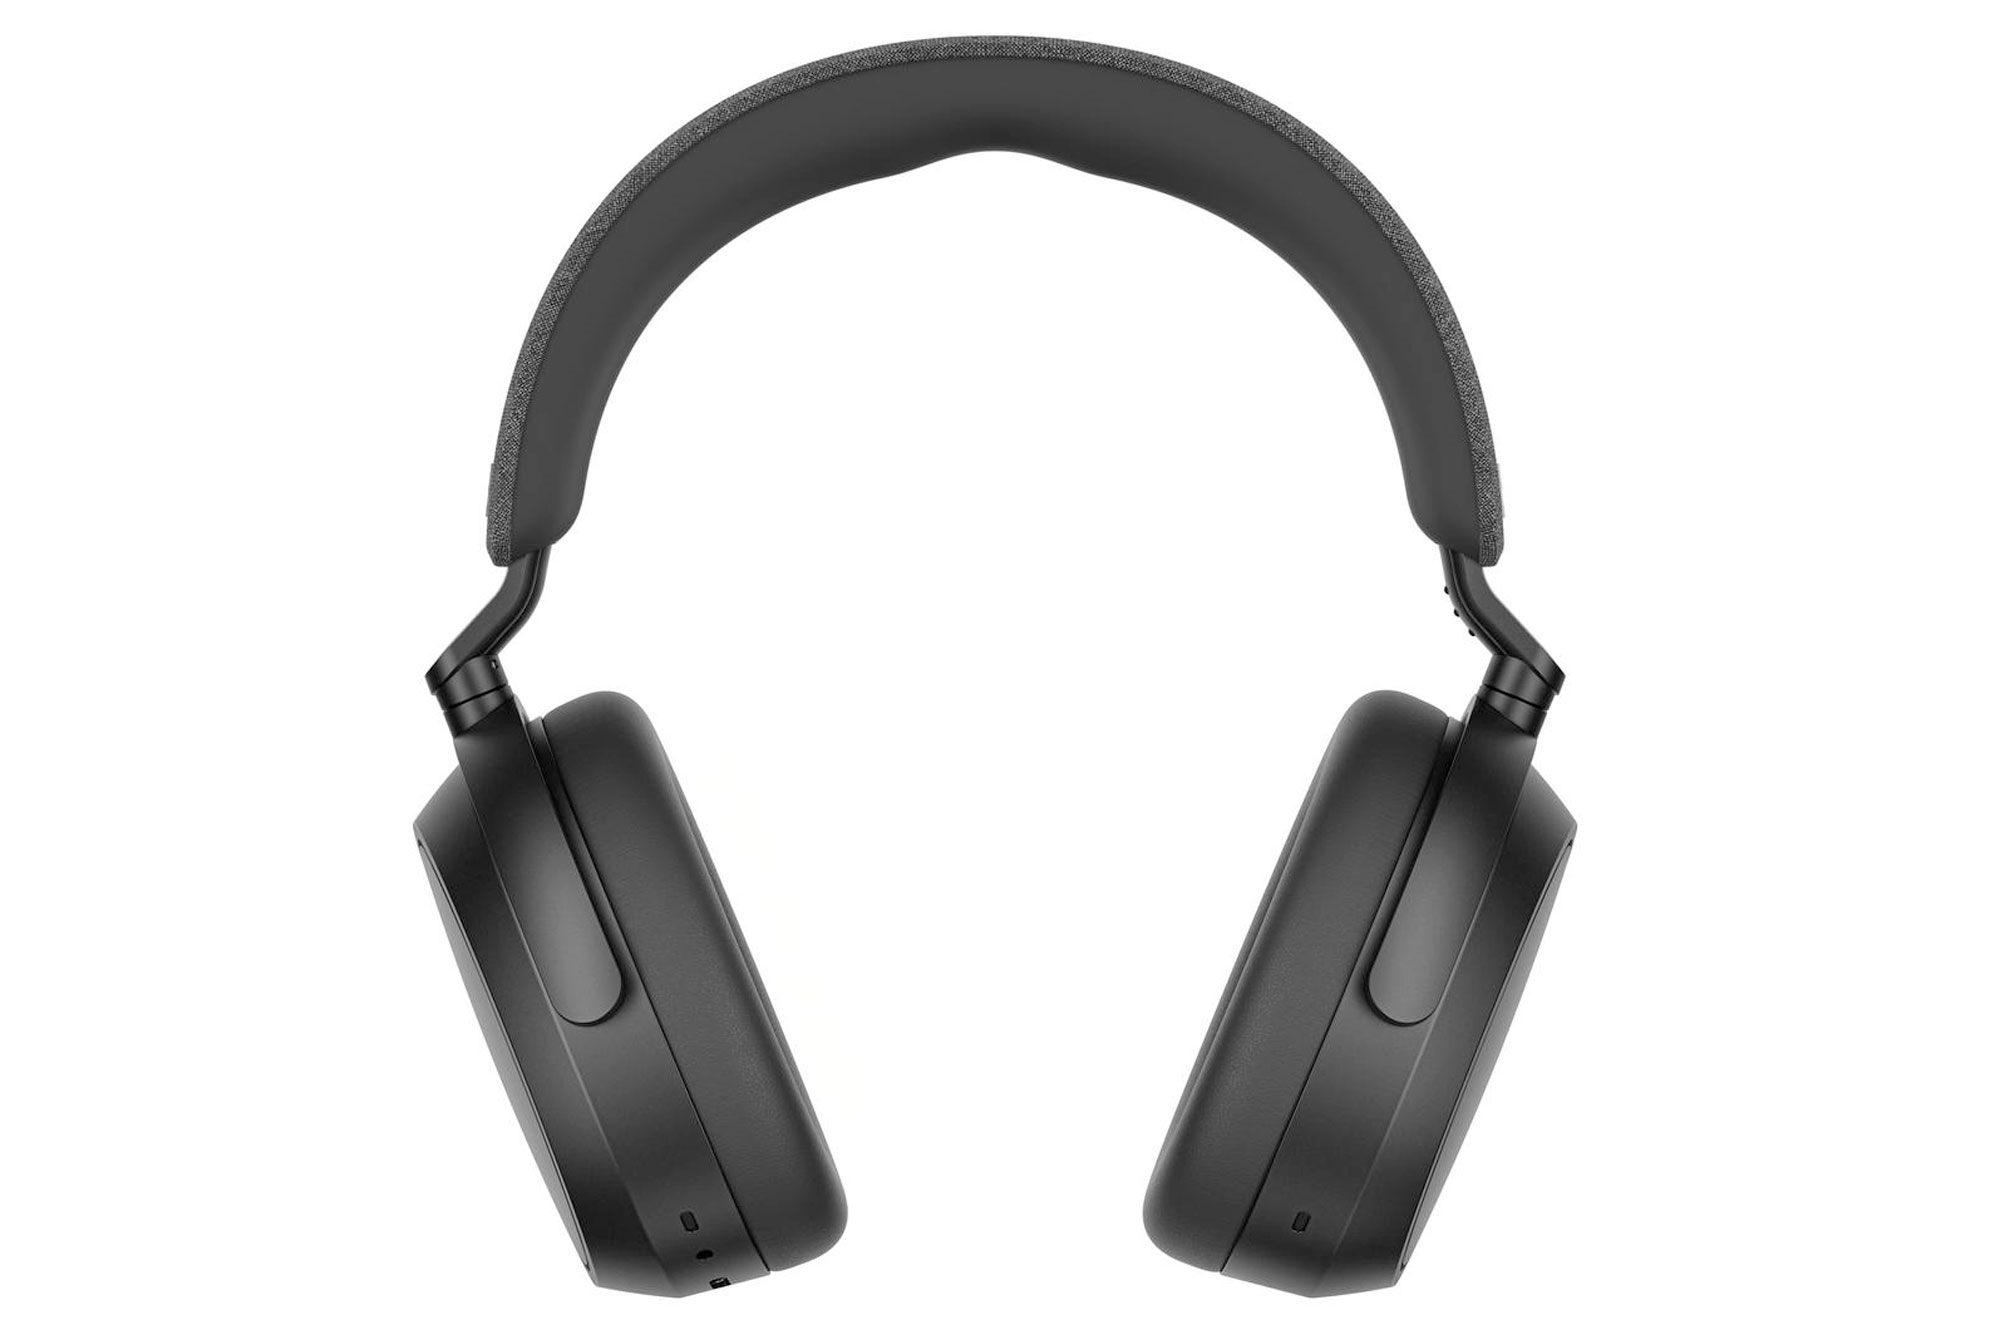 Sennheiser promises 60 hours of listening with its new Momentum headphones | DeviceDaily.com